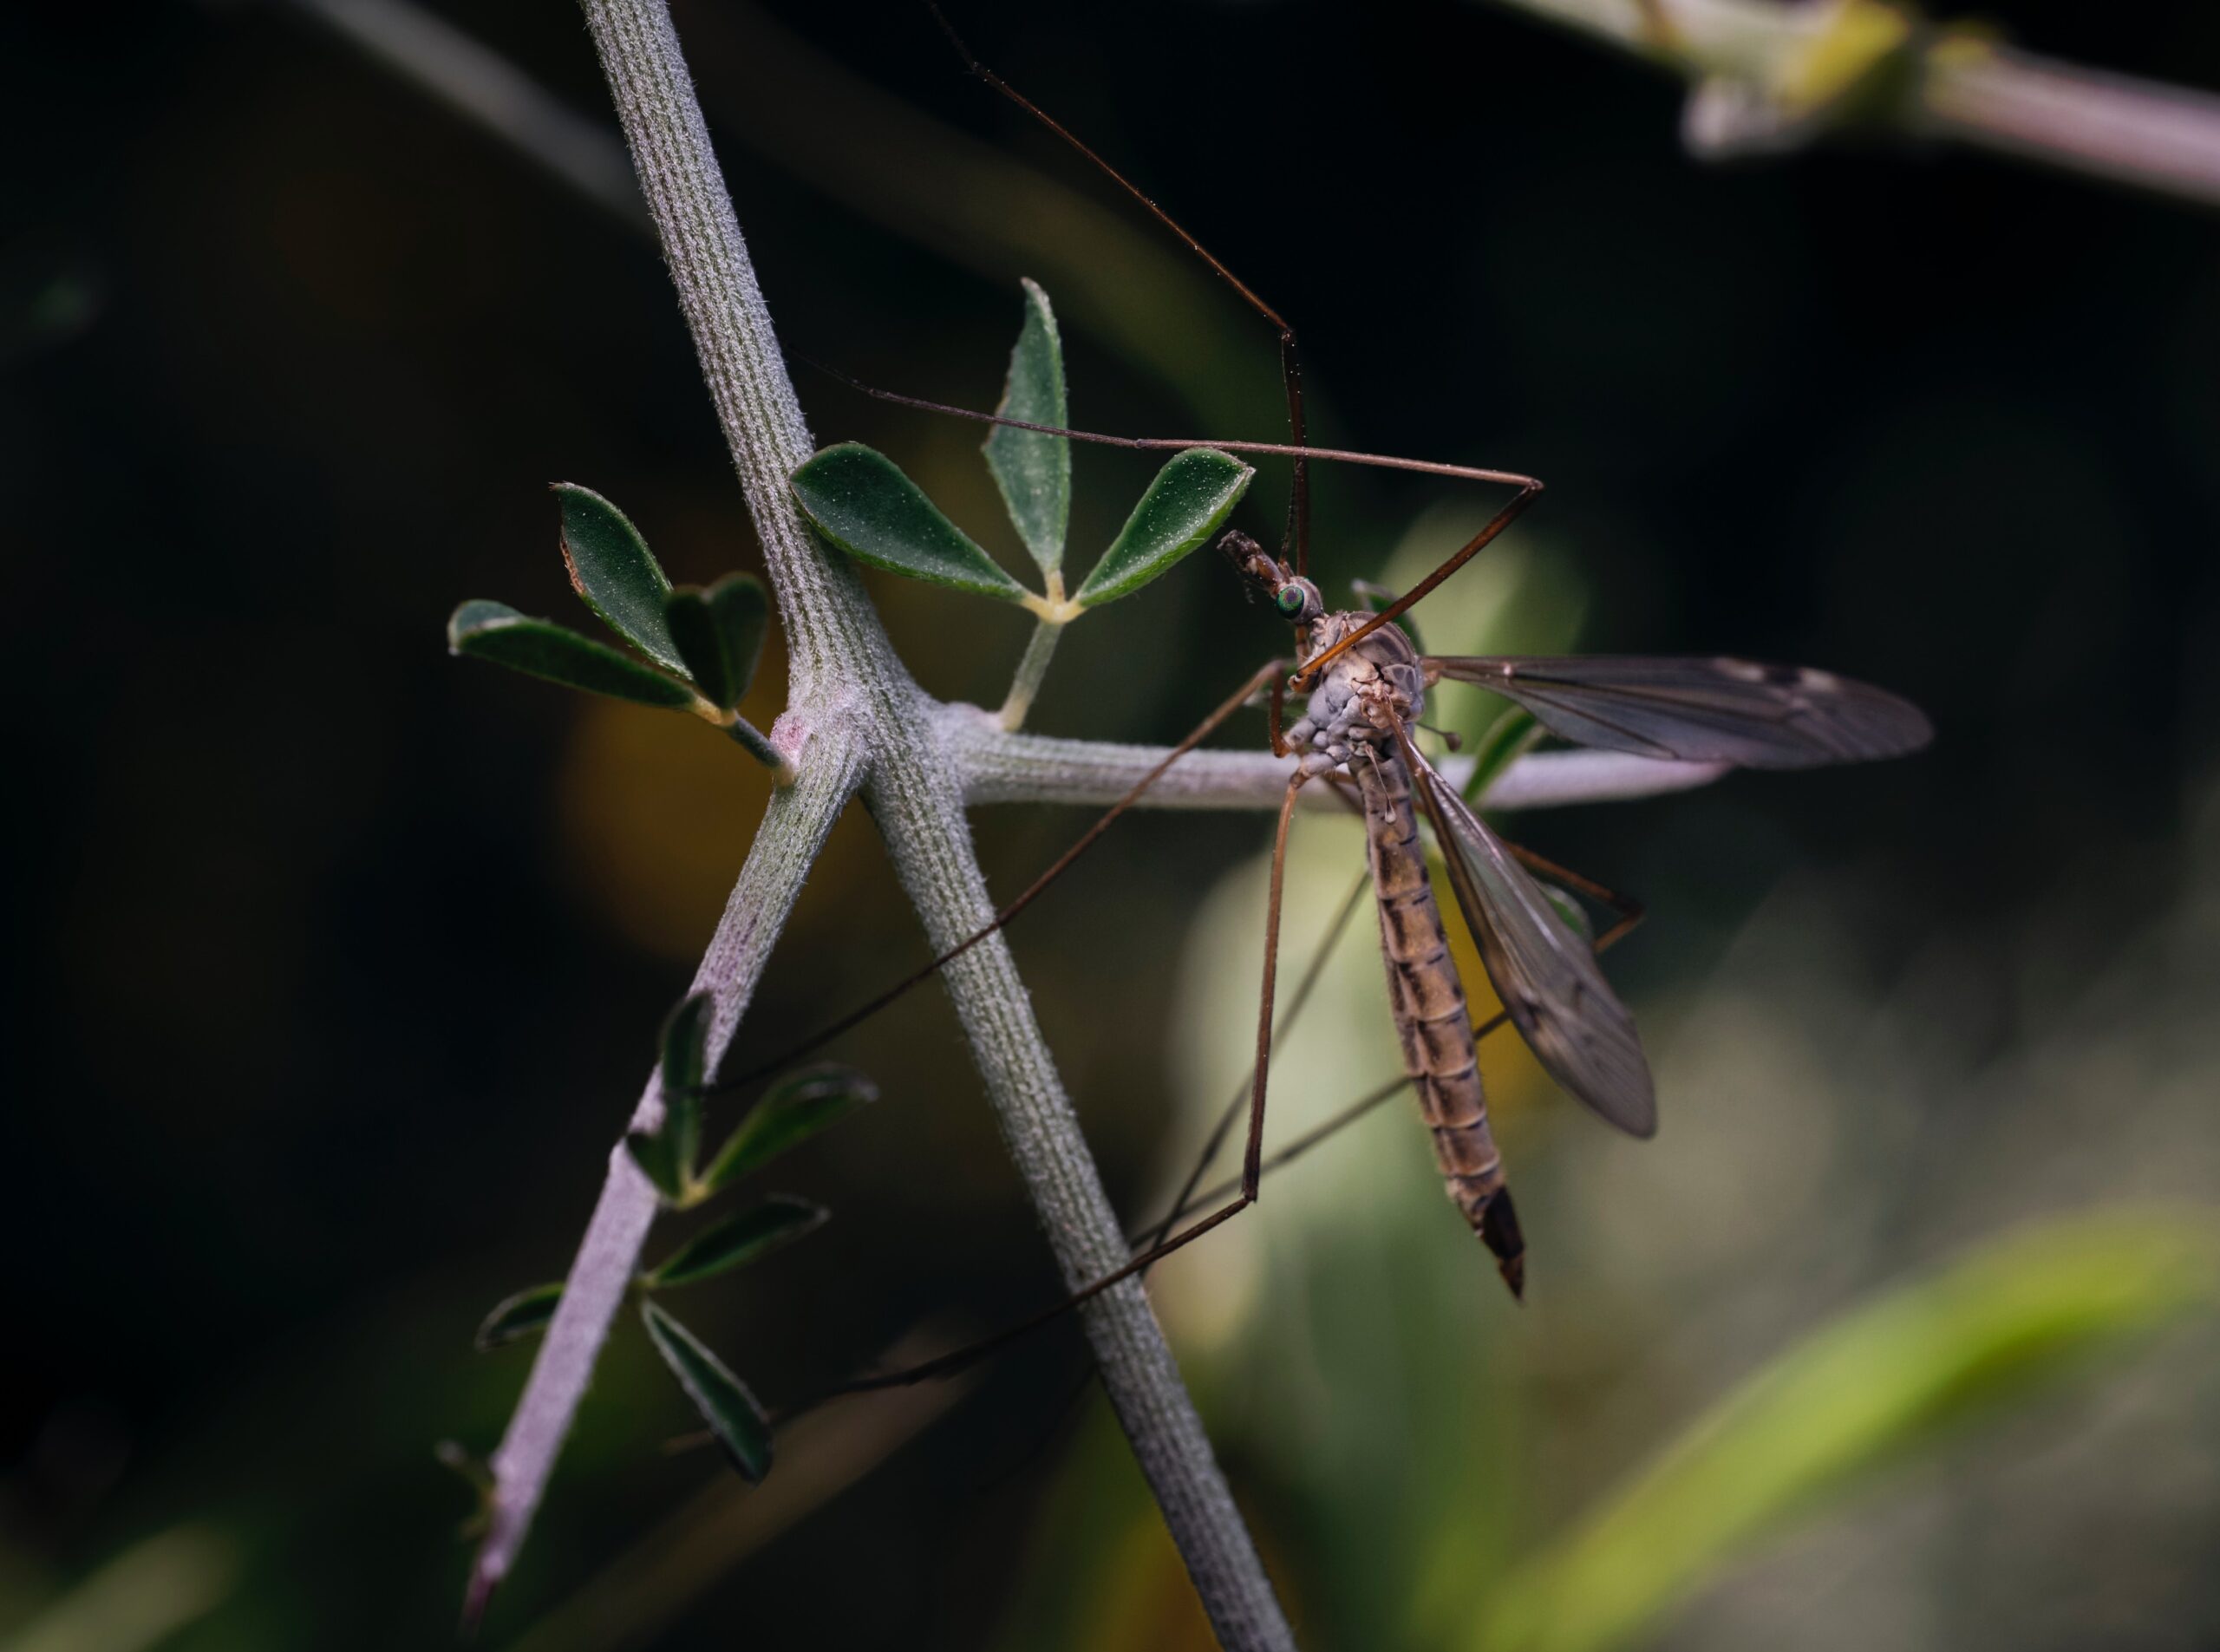 brown and black dragonfly perched on green plant stem in close up photography during daytime